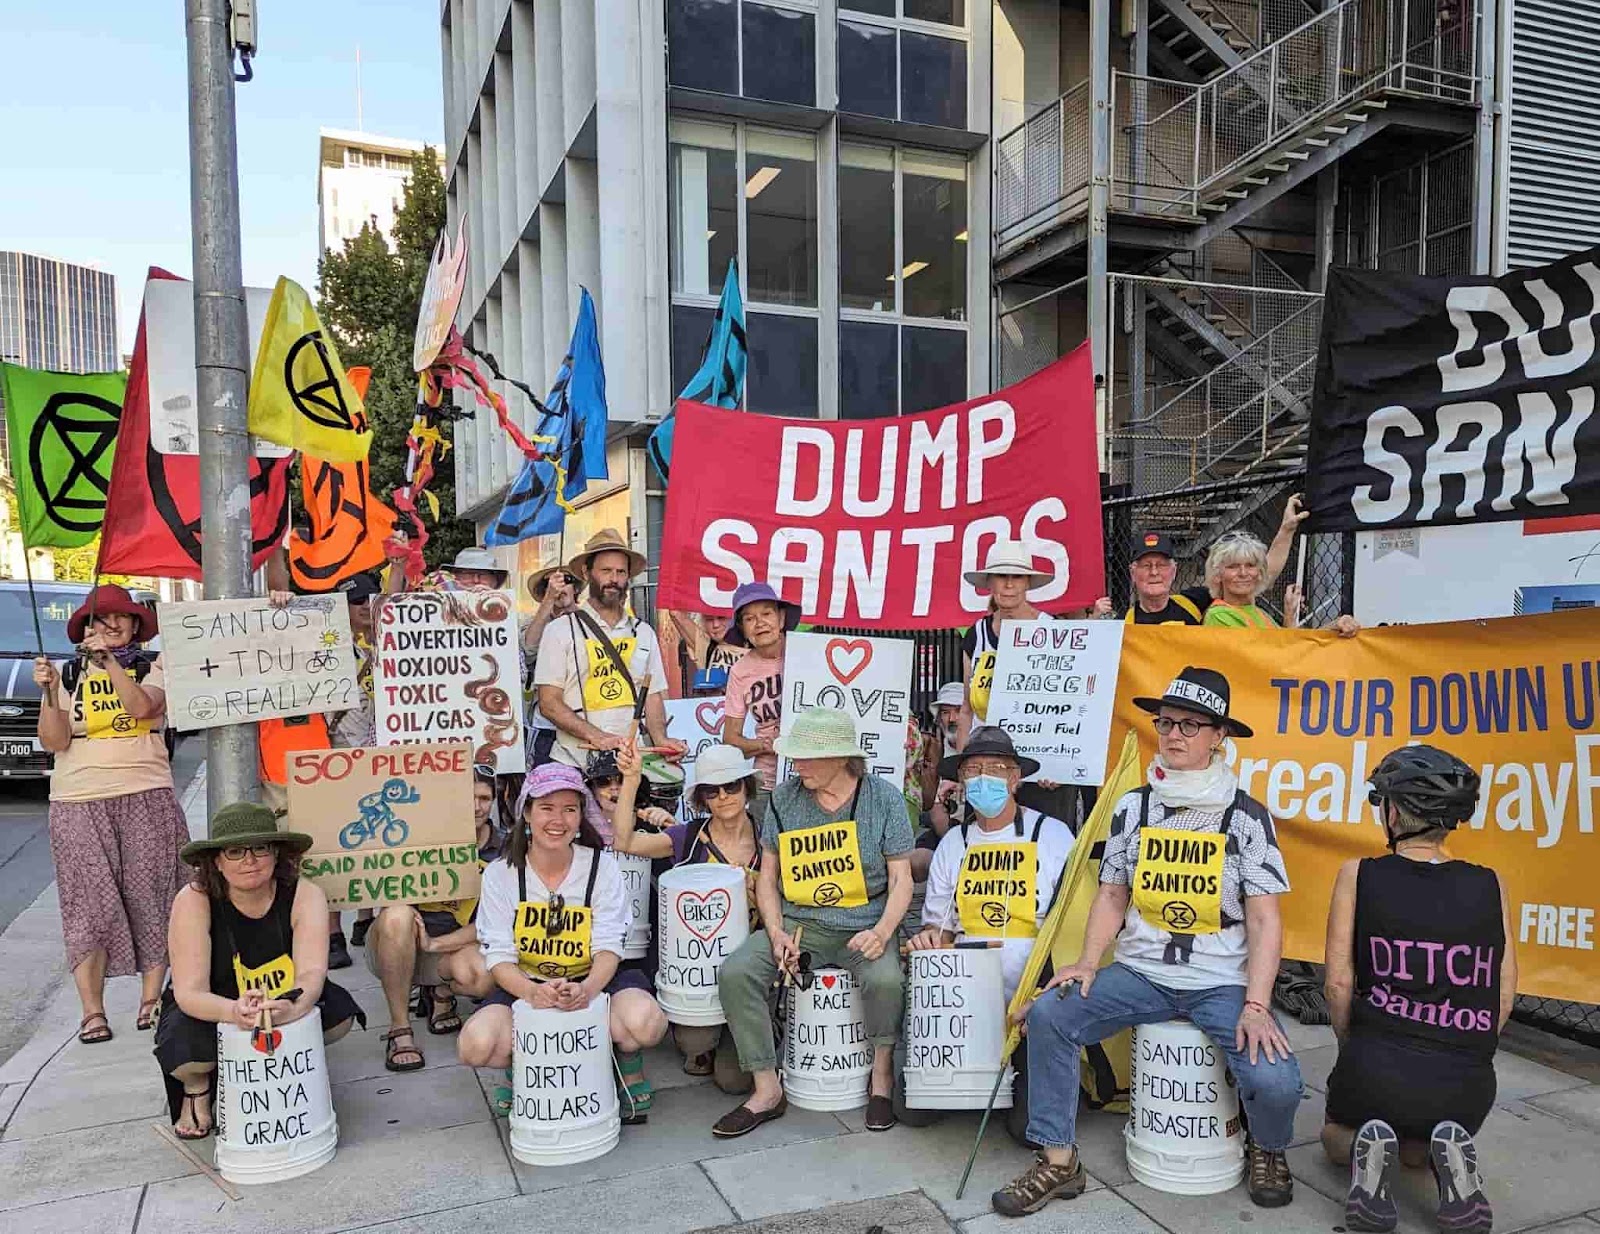 Rebels pose on the street with drums and dump santos signs